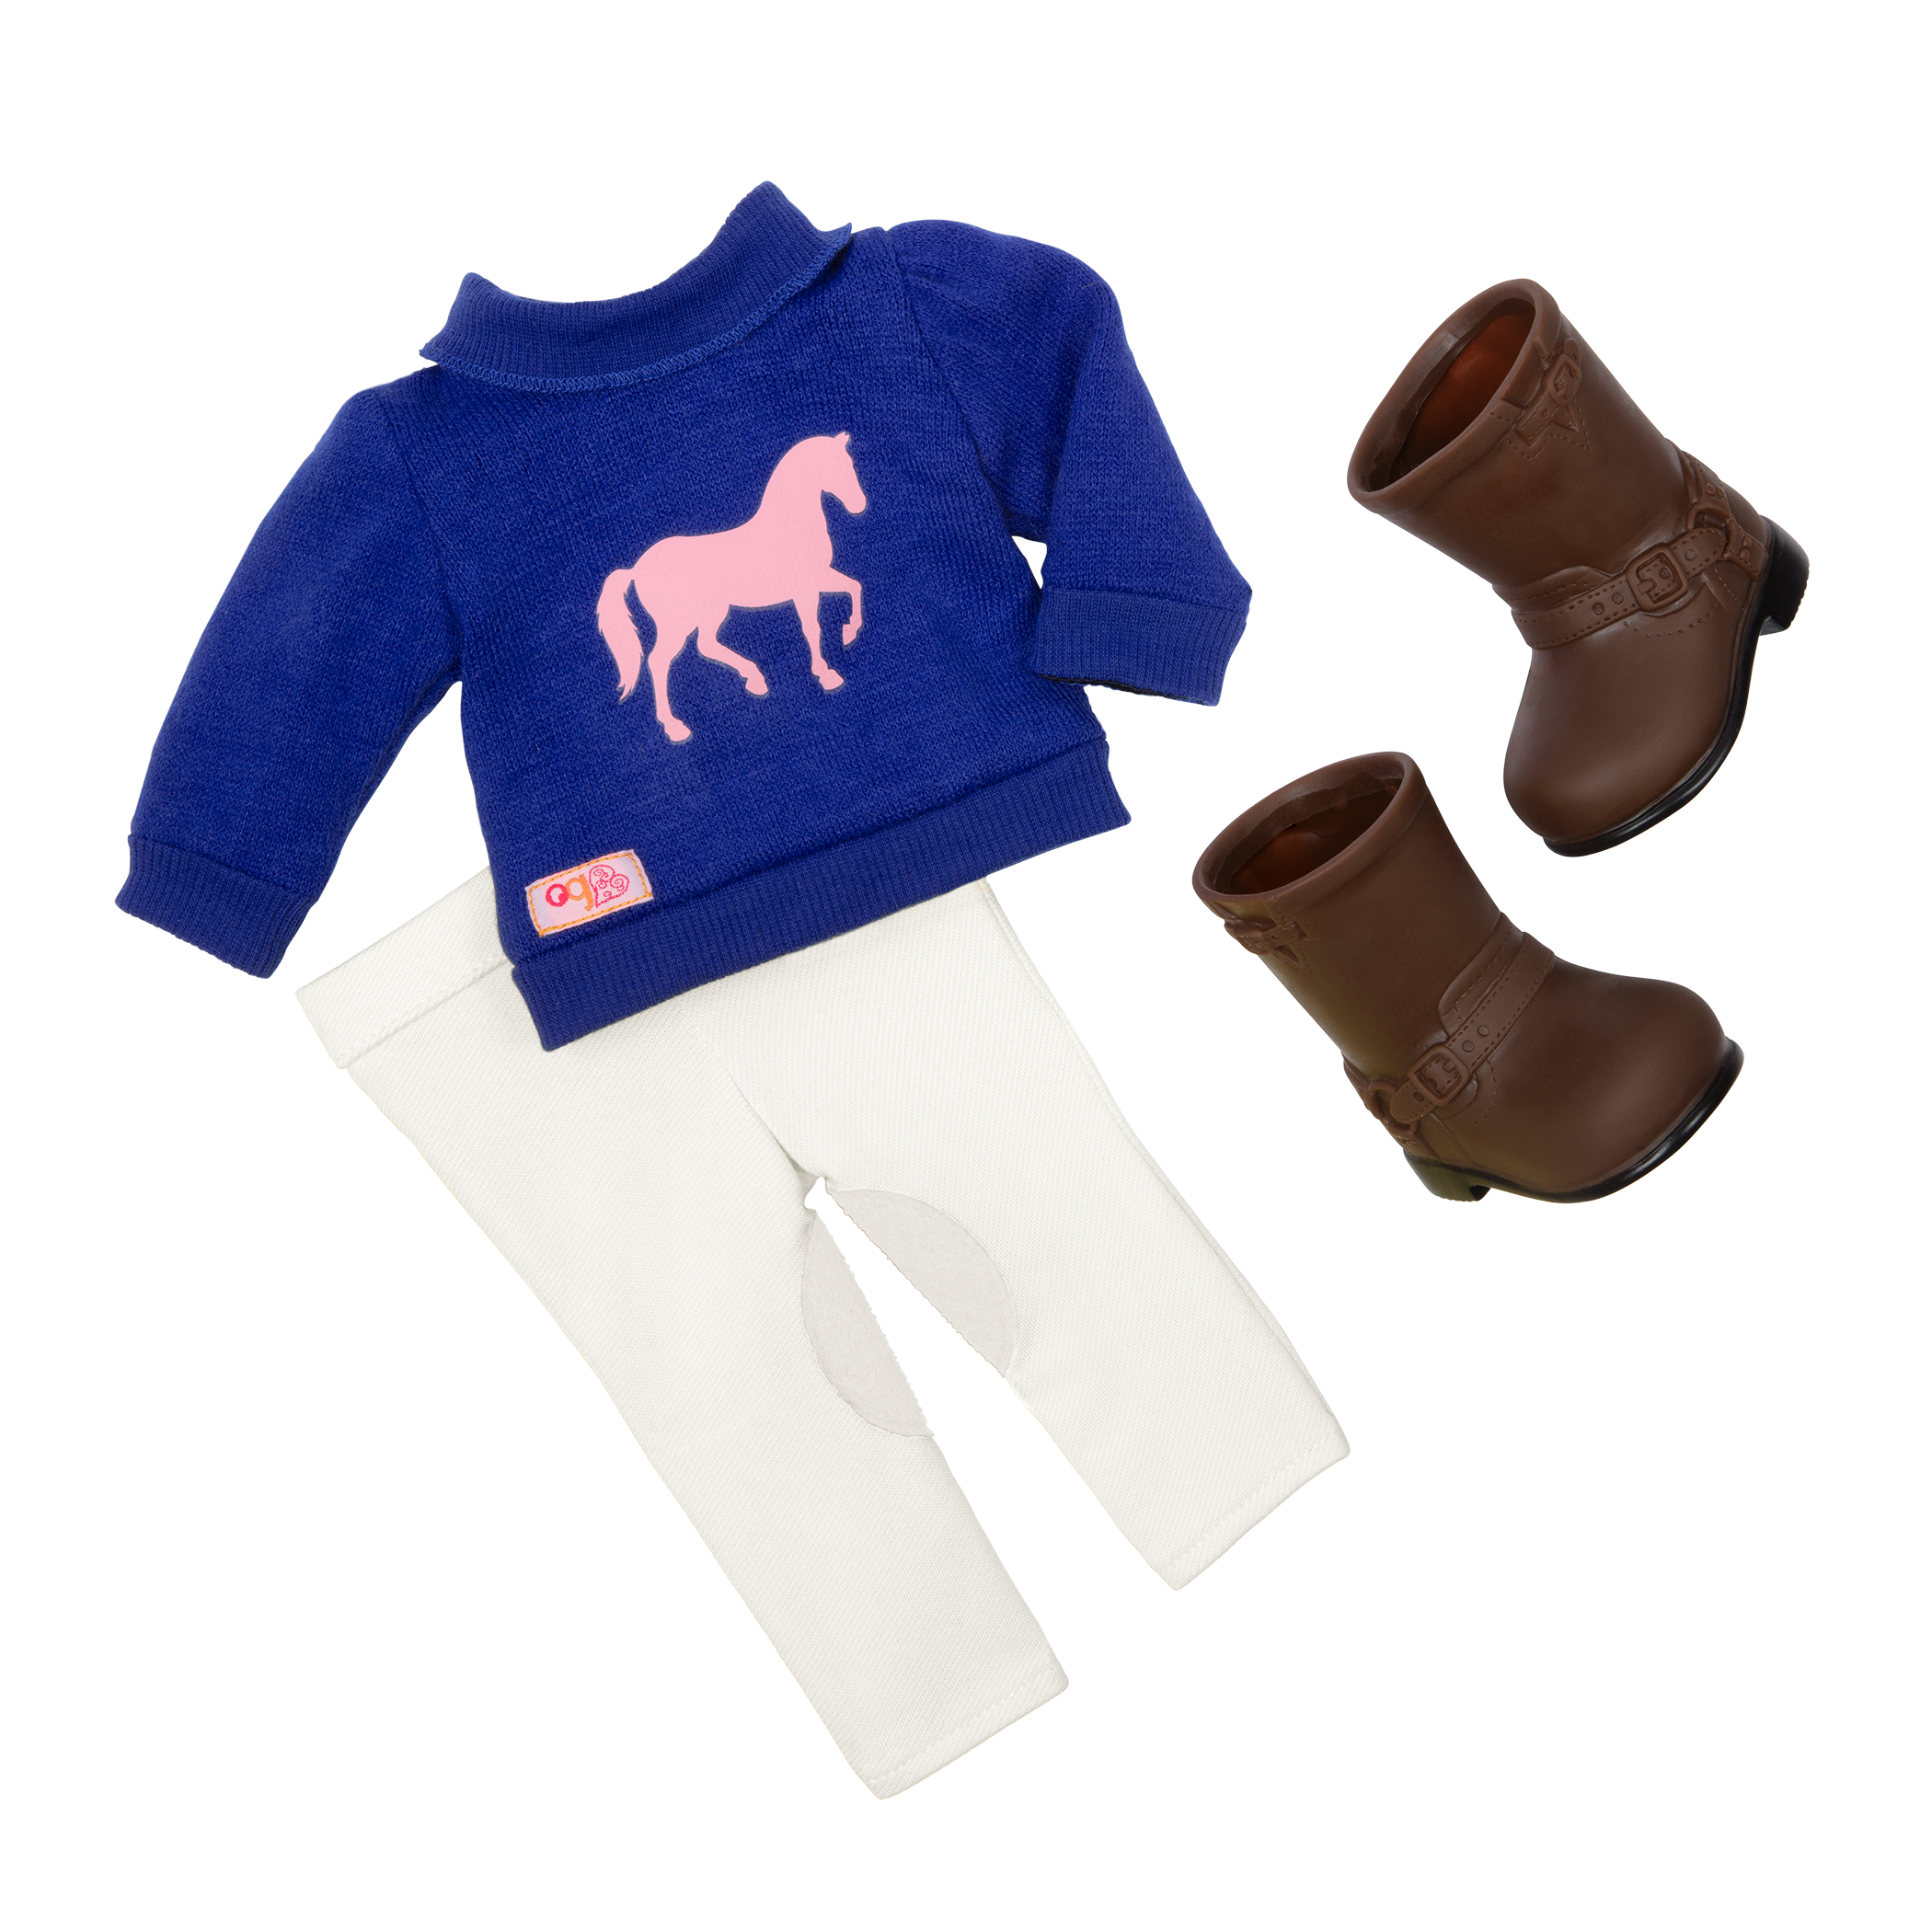 18-inch equestrian doll with blonde hair and green eyes